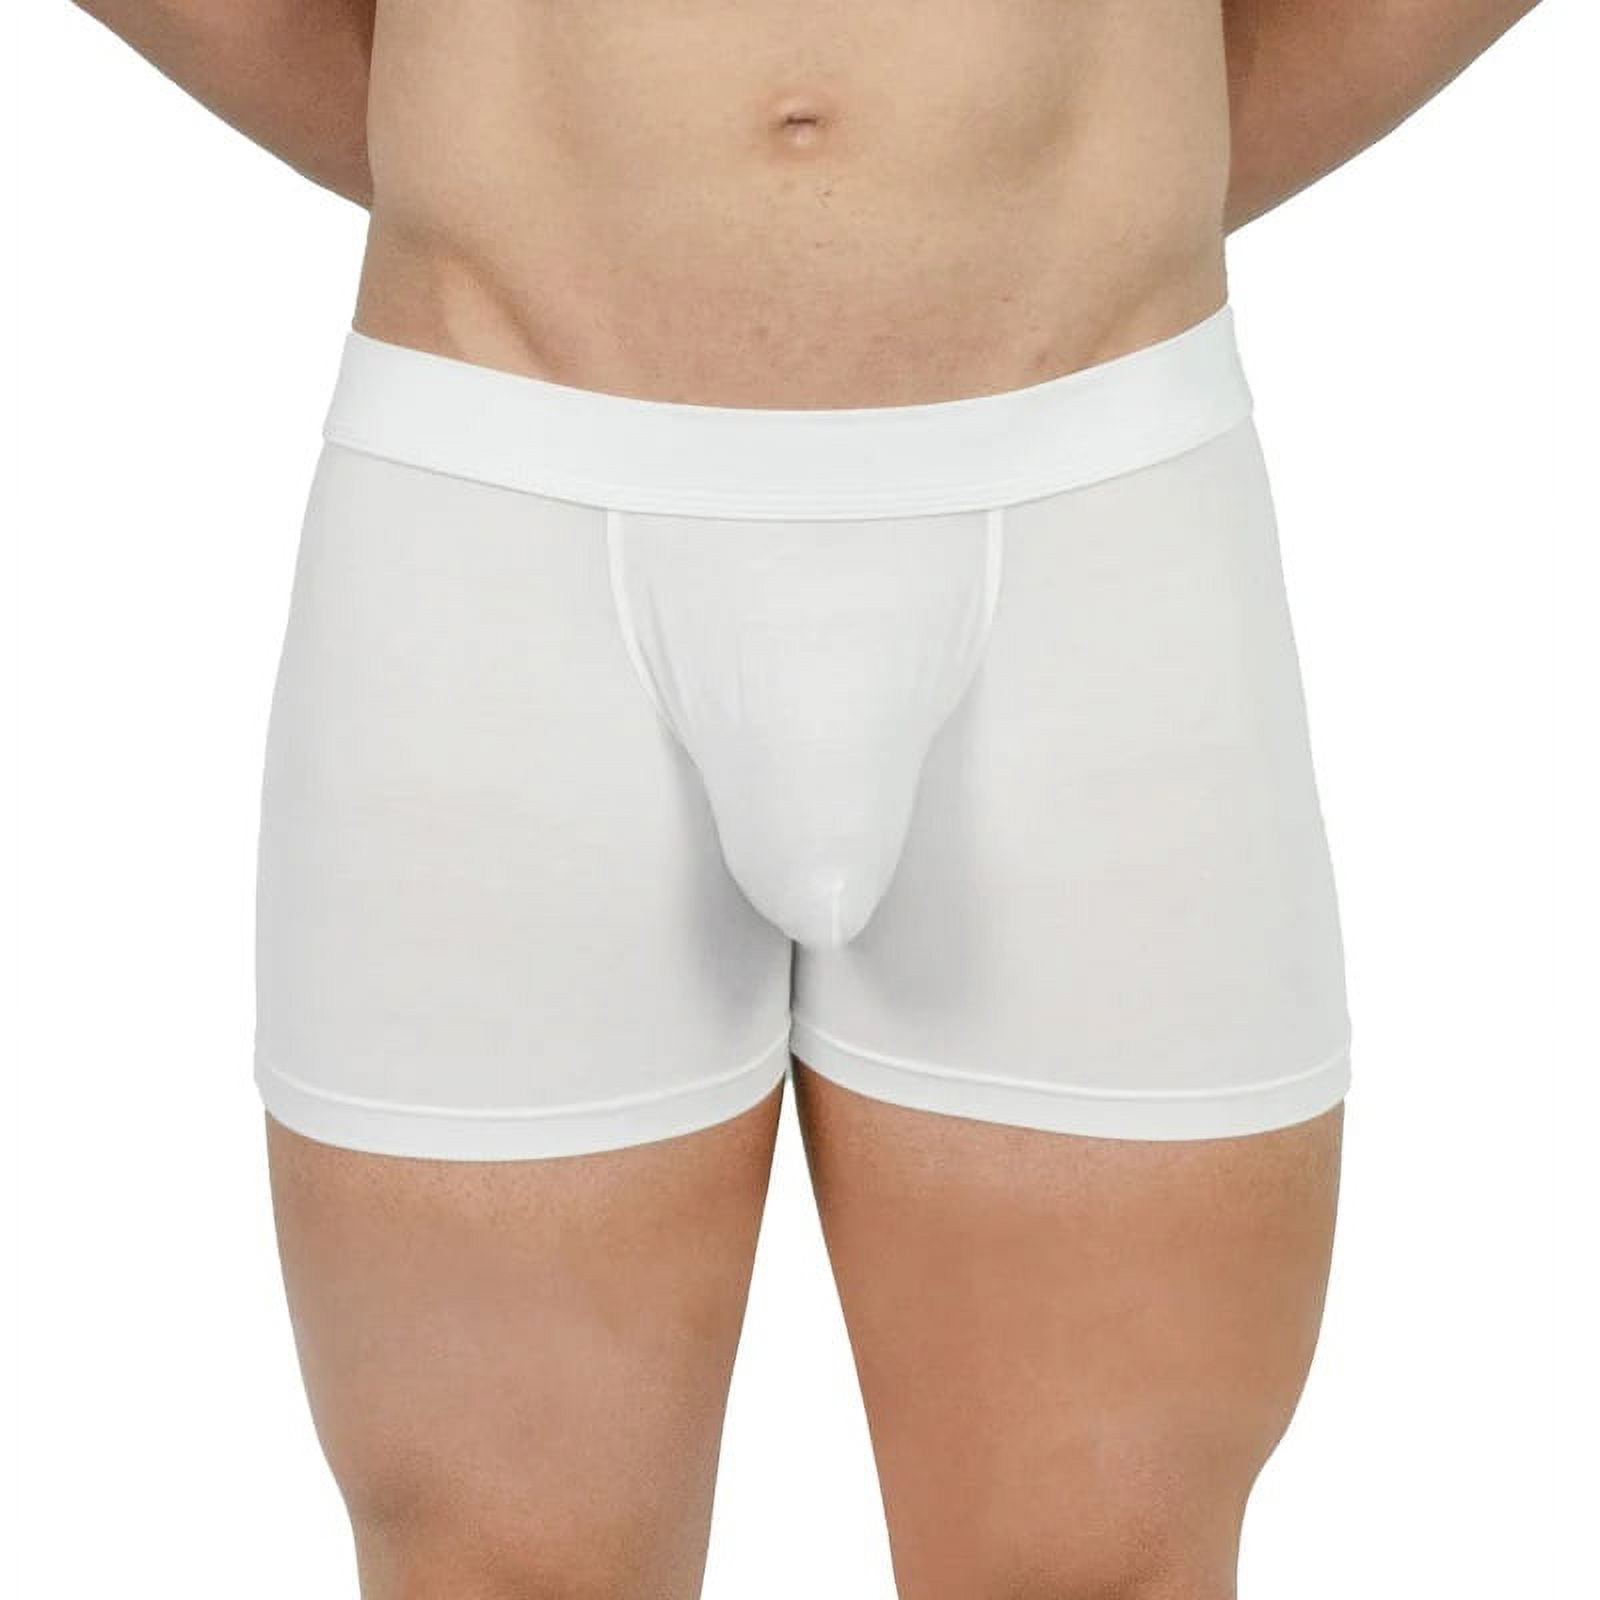 Obviously EliteMan - Boxer Brief 3 inch Leg (Mint, Small) 